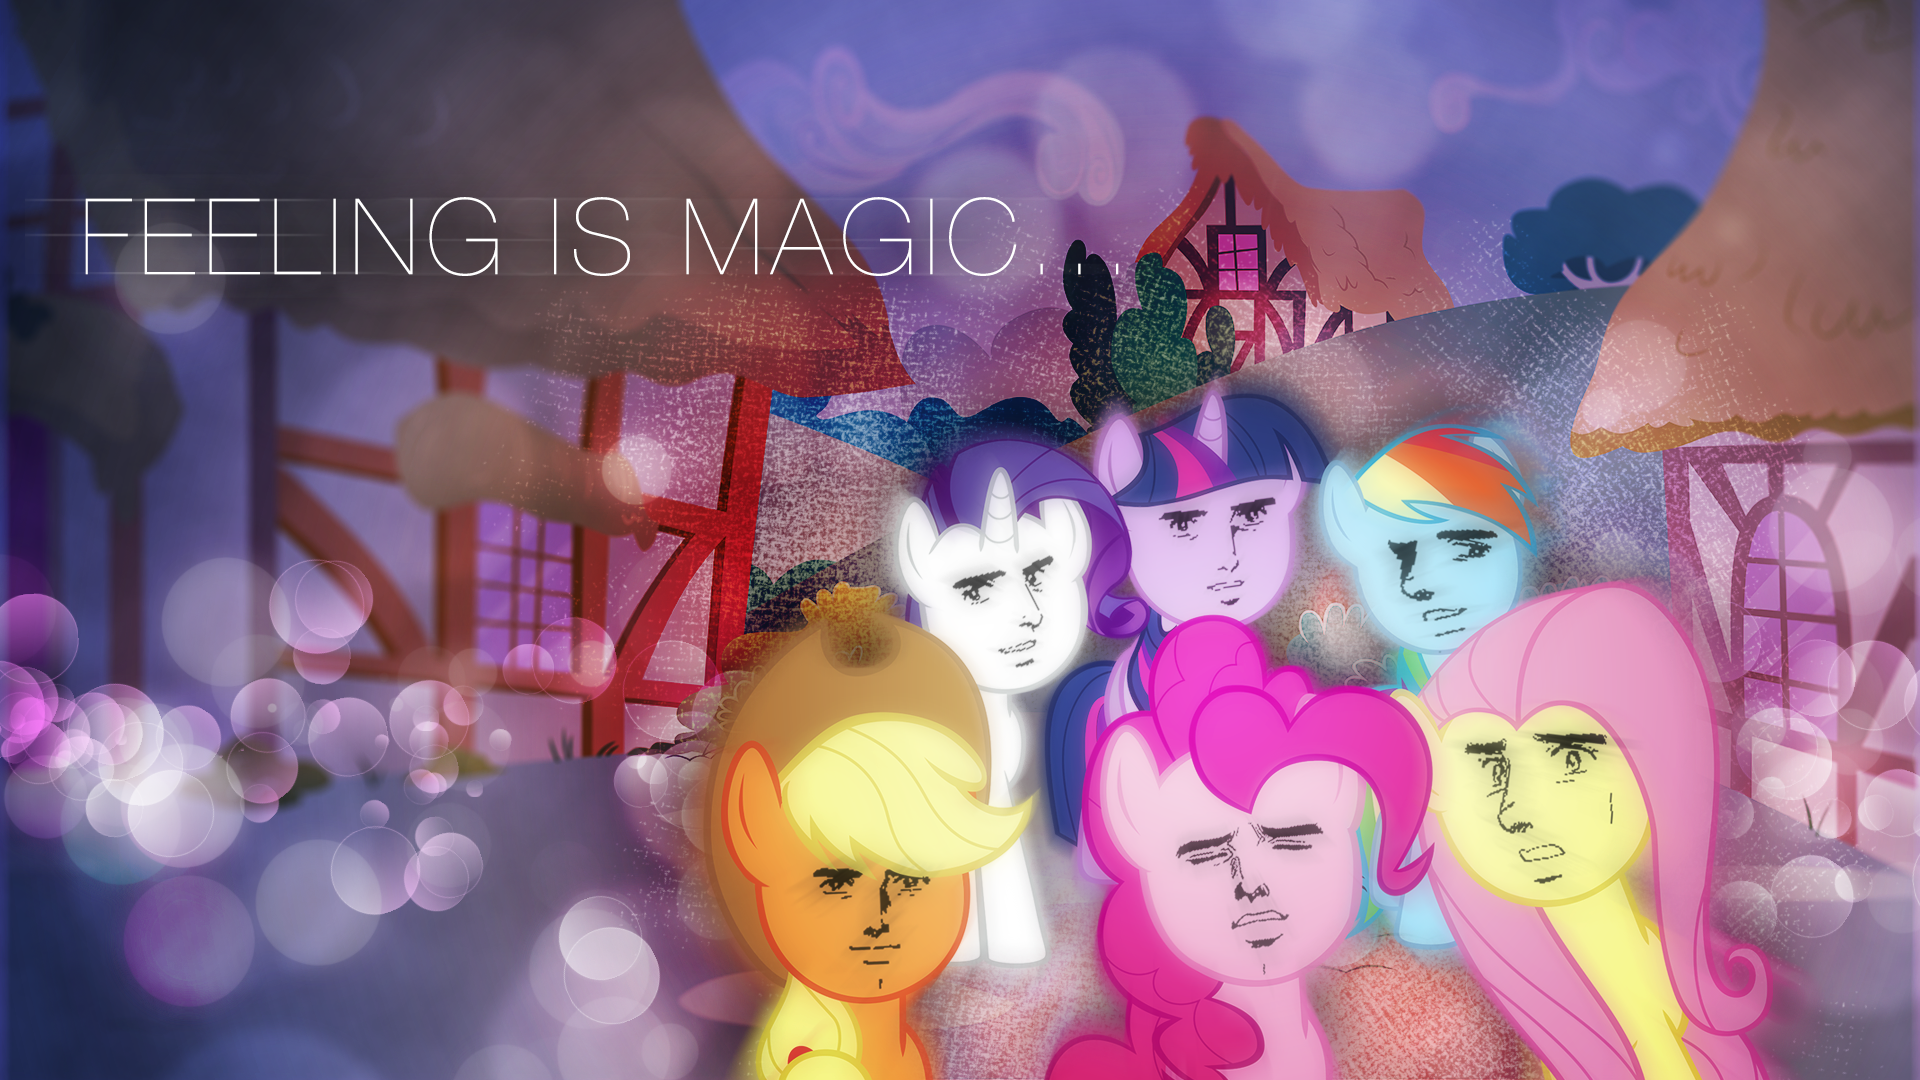 Feeling is Magic -10k pageview special- by Austiniousi, KibbieTheGreat and mattyhex